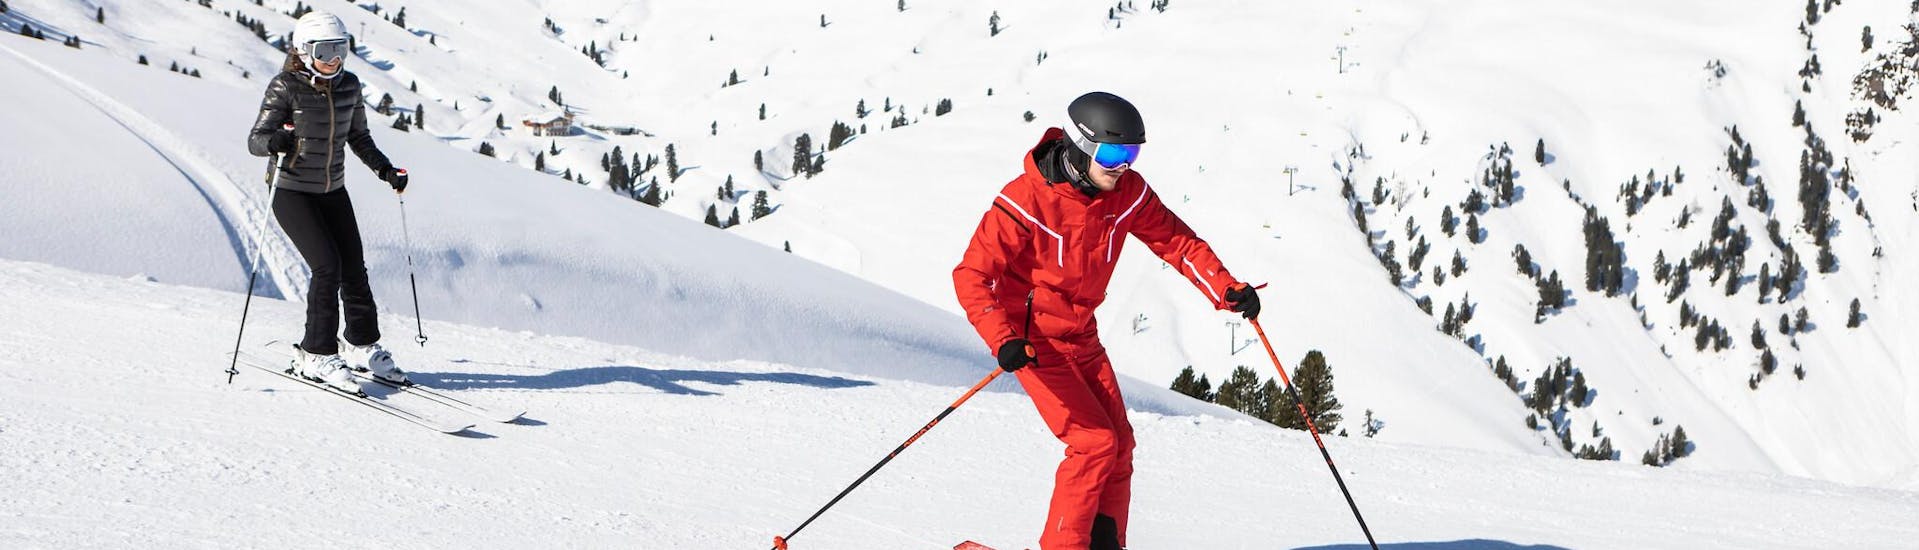 A skier practices the correct skiing technique during one of the private lessons in Aragon.